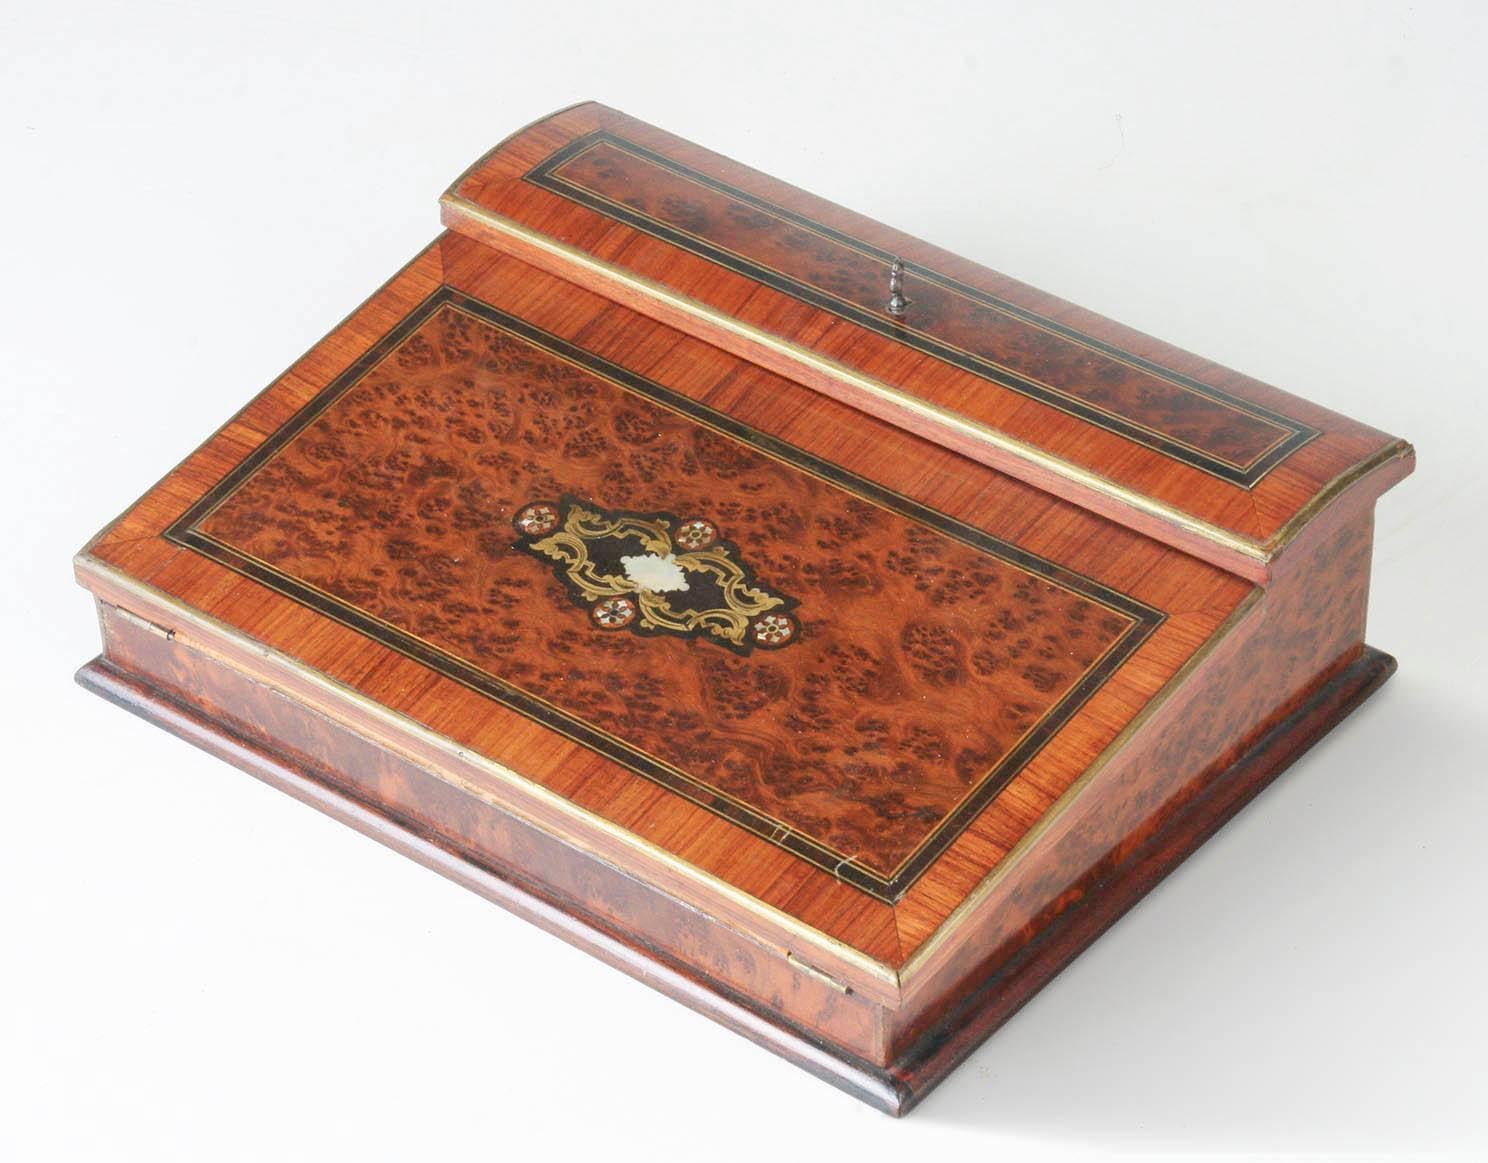 Beautiful antique writing slope case, from France, late 19th century.
The chest is veneered with burr walnut and inlaid with copper edges and mother of pearl inlay. The interior is covered with leather. With lock and working key.